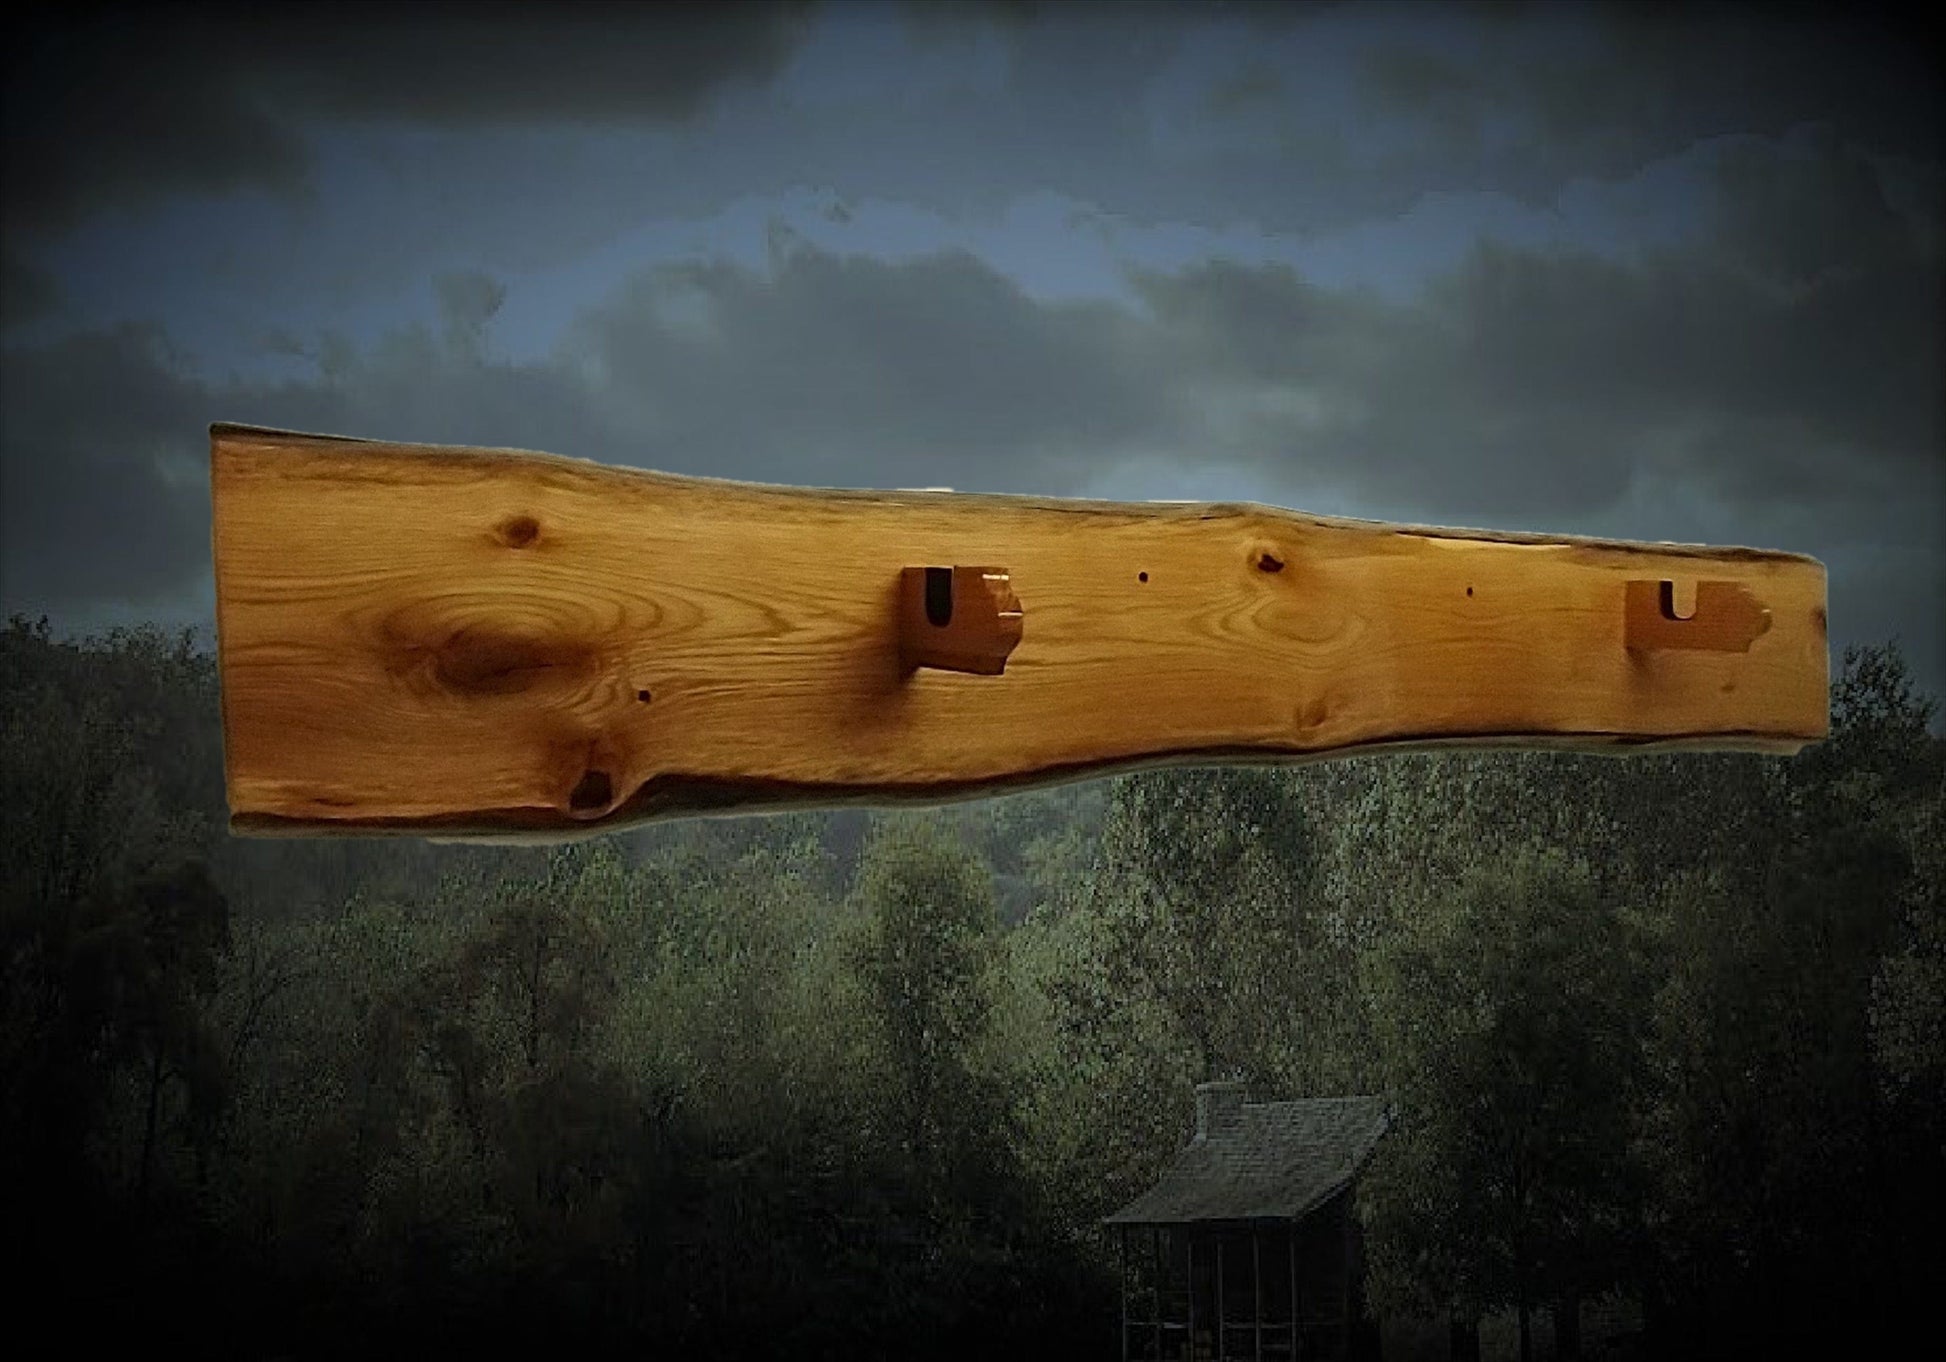 Walker Wood Gifts gun rack Rustic Live Edge Swamp Oak Musket Display Natural Knotty Grained Warm Gloss Finish Great Vintage Gun Collectors Gift